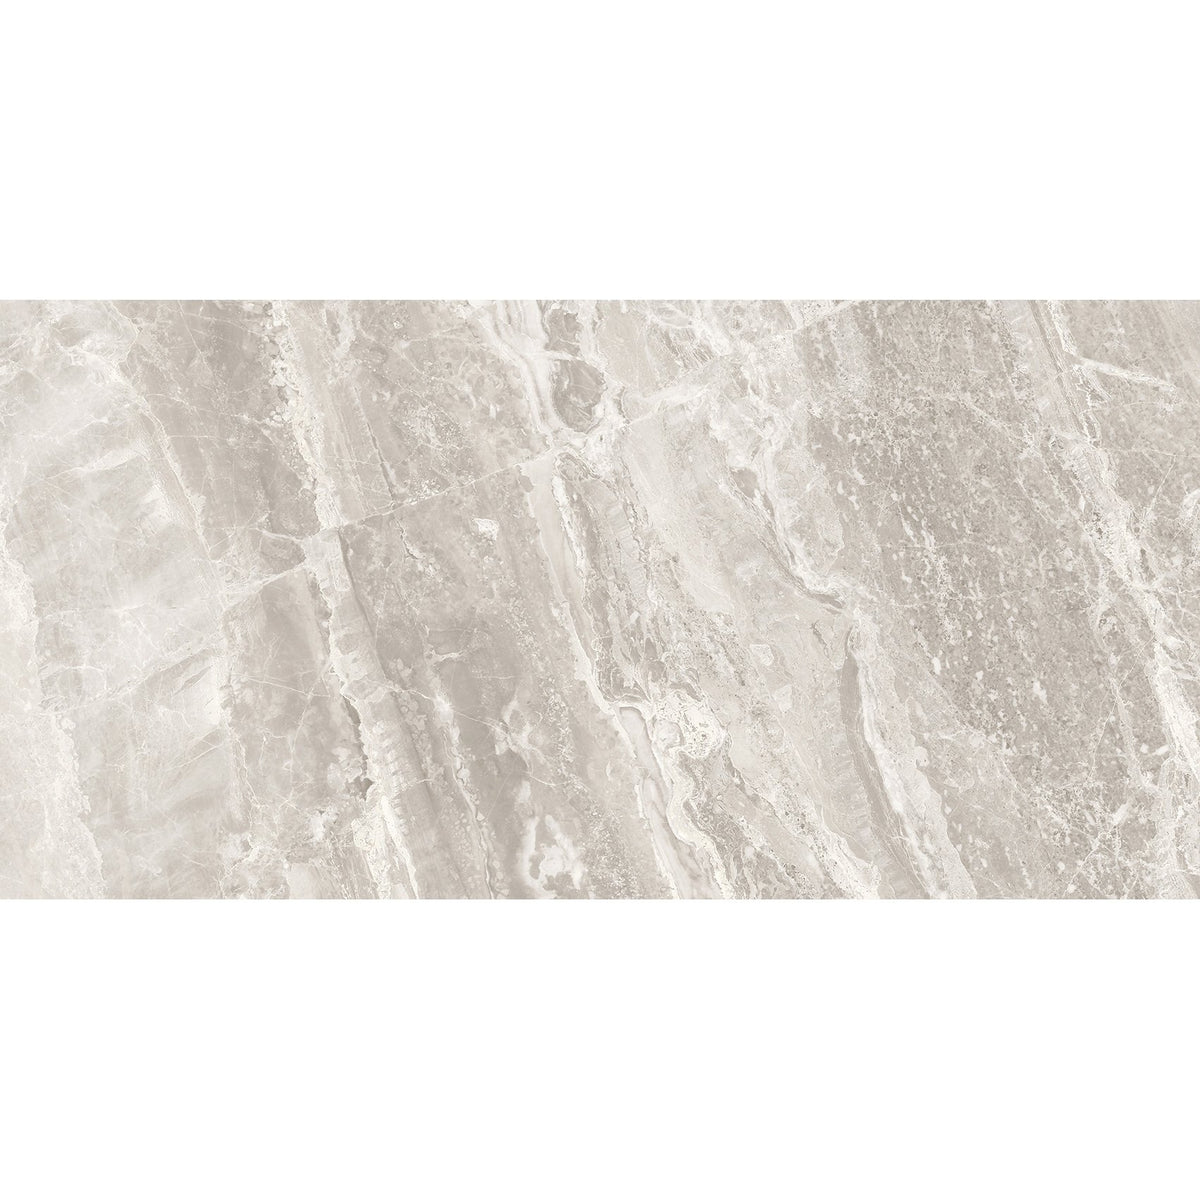 Anatolia Mayfair 12 in. x 24 in. HD Rectified Porcelain Tile - Stella Argento (Polished)